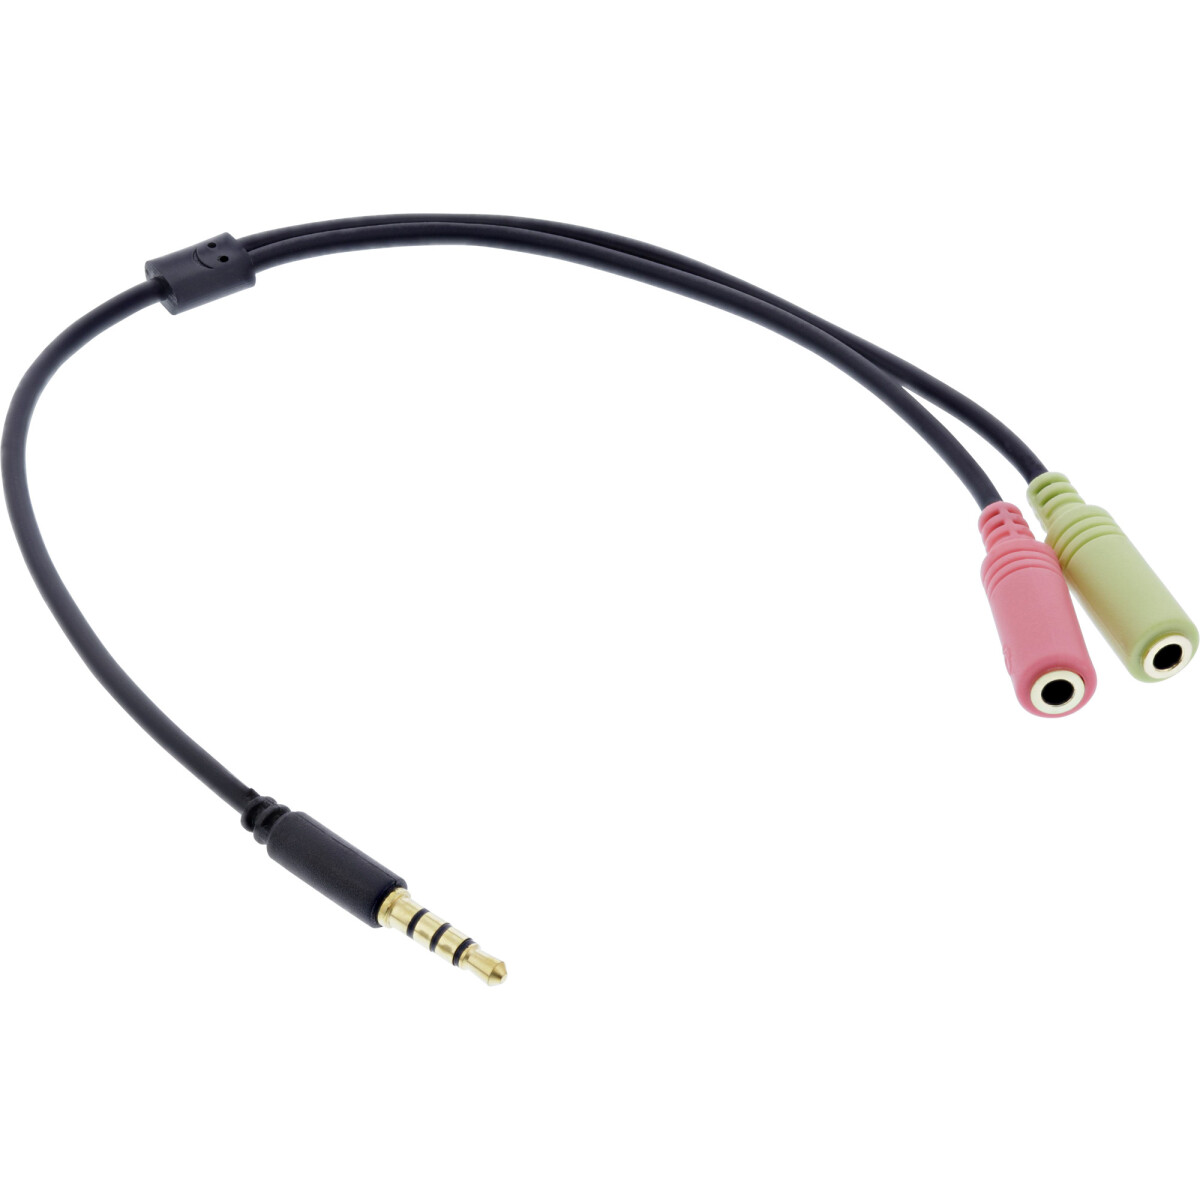 InLine® Audio Headset Adapter Cable 3.5mm male 4 Pin...